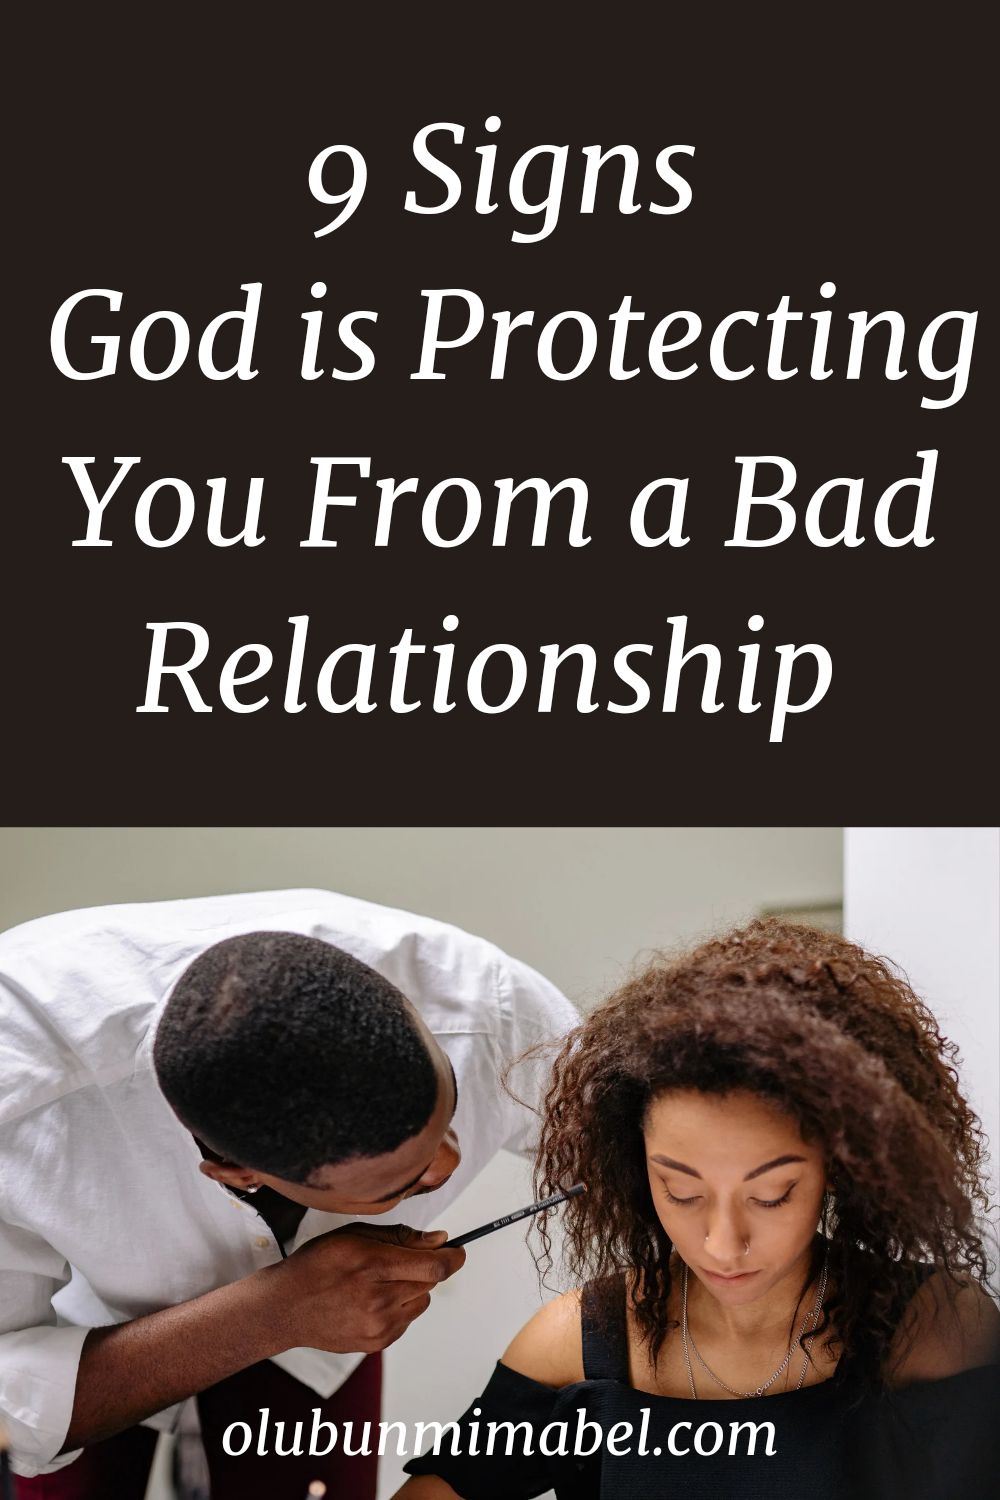 Signs God is Protecting You From a Bad Relationship